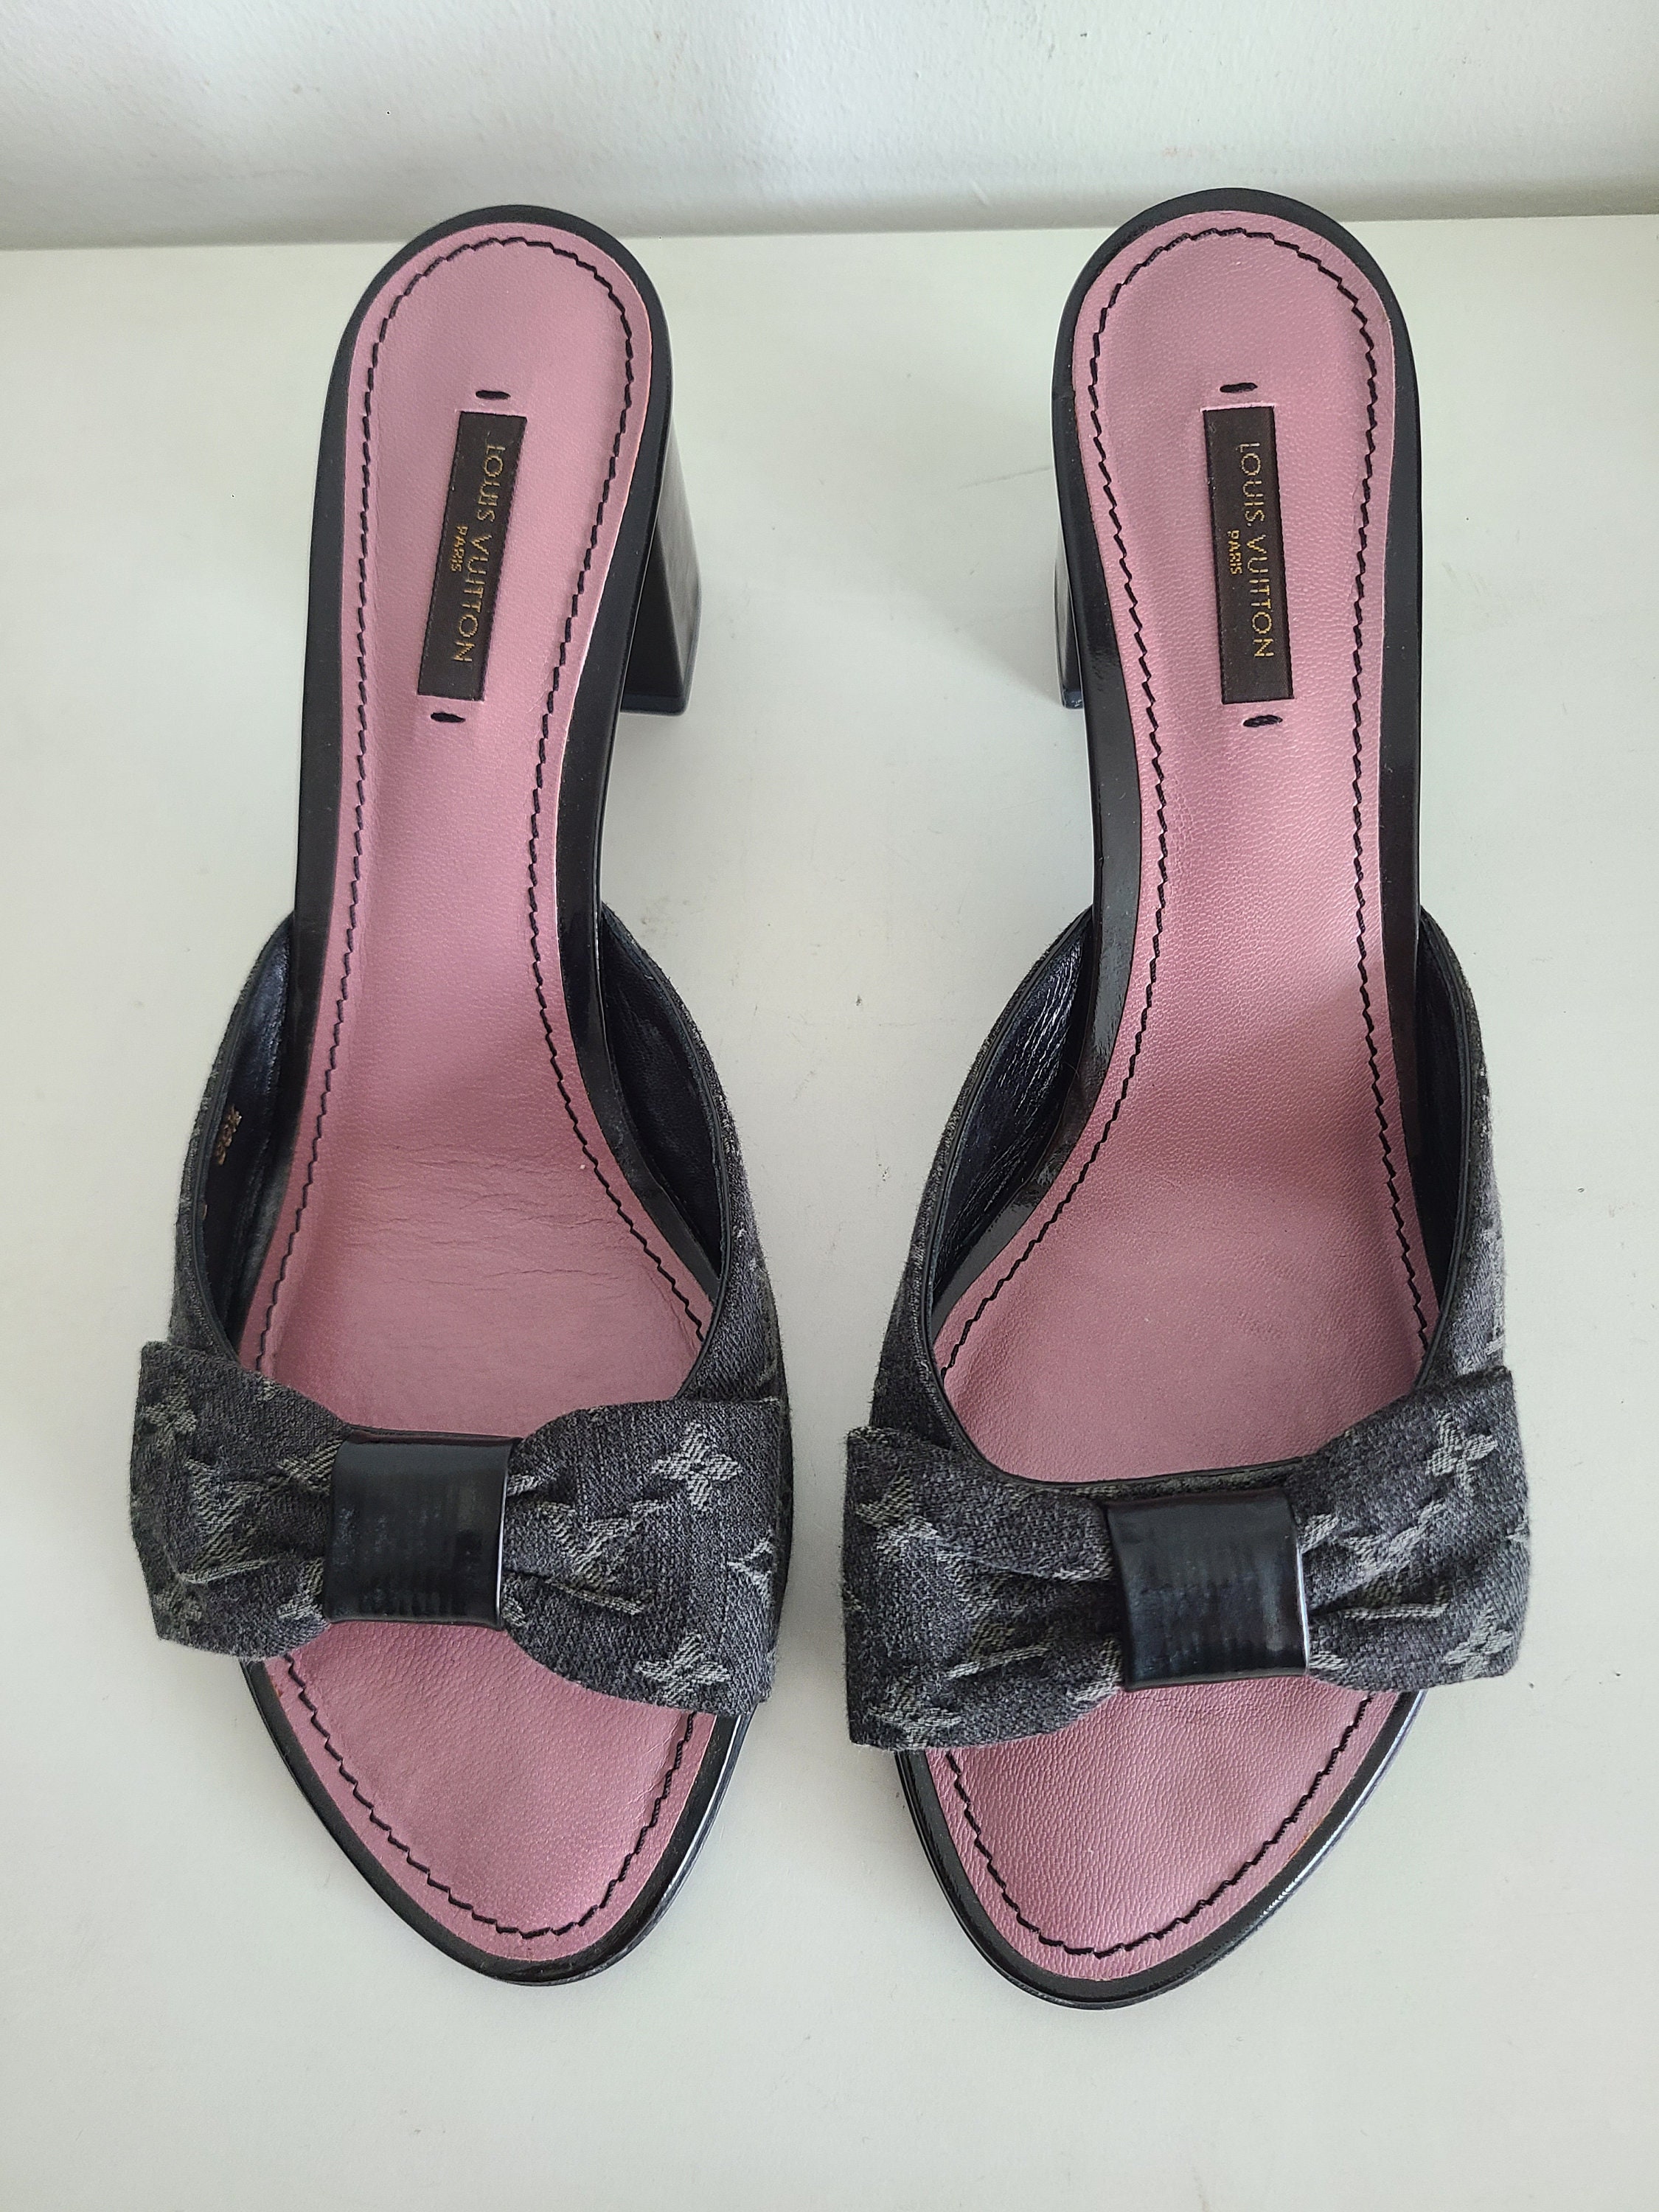 Louis Vuitton - Authenticated Heel - Patent Leather Pink Plain for Women, Very Good Condition